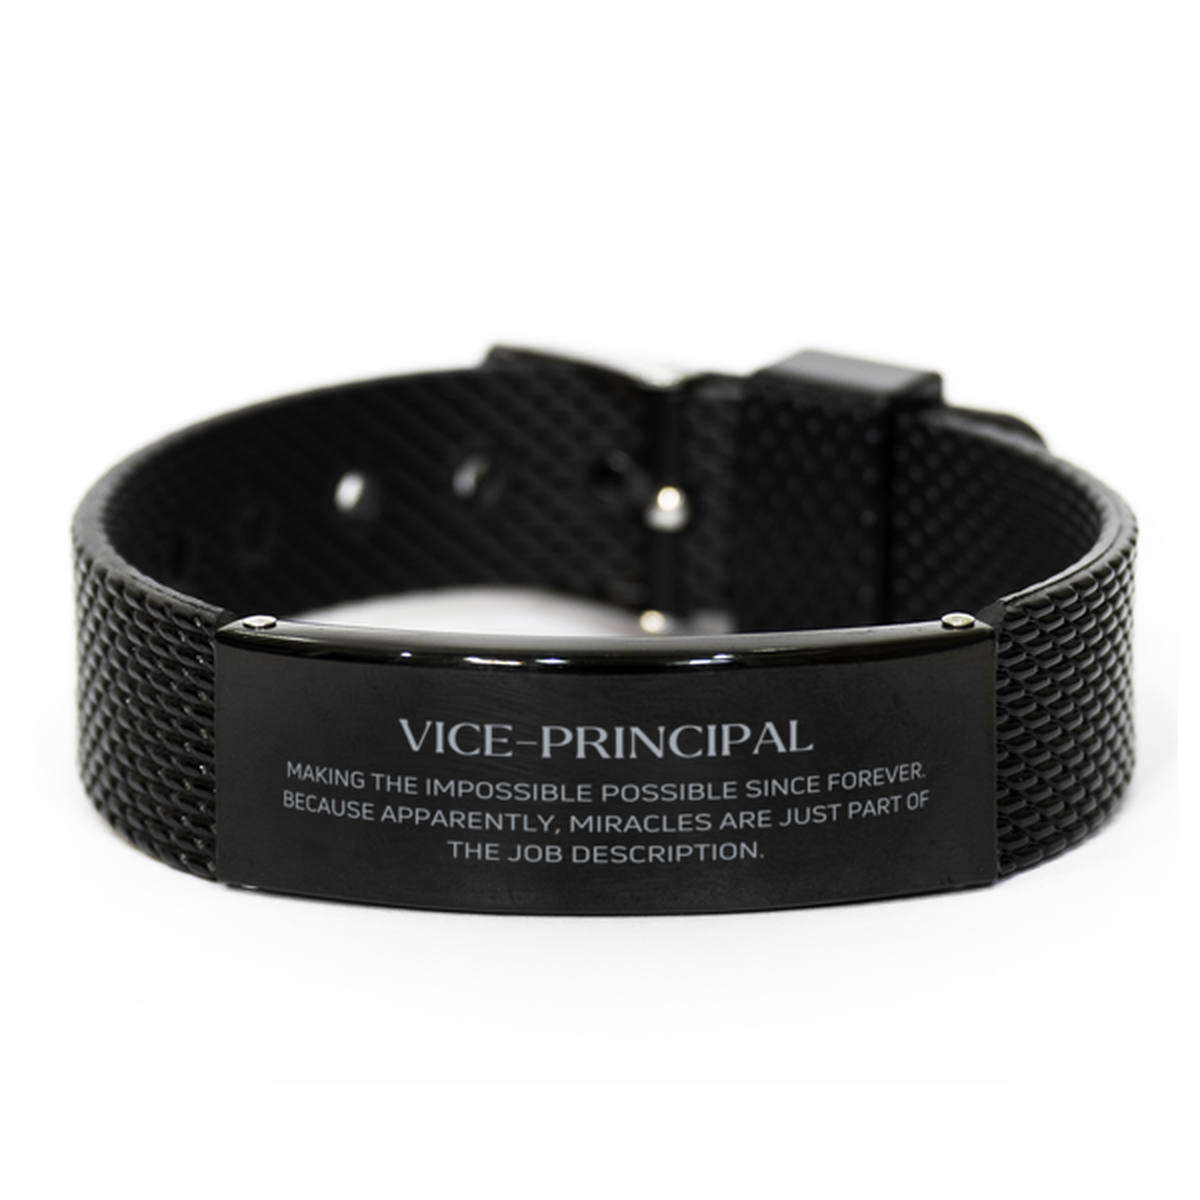 Funny Vice-principal Gifts, Miracles are just part of the job description, Inspirational Birthday Black Shark Mesh Bracelet For Vice-principal, Men, Women, Coworkers, Friends, Boss